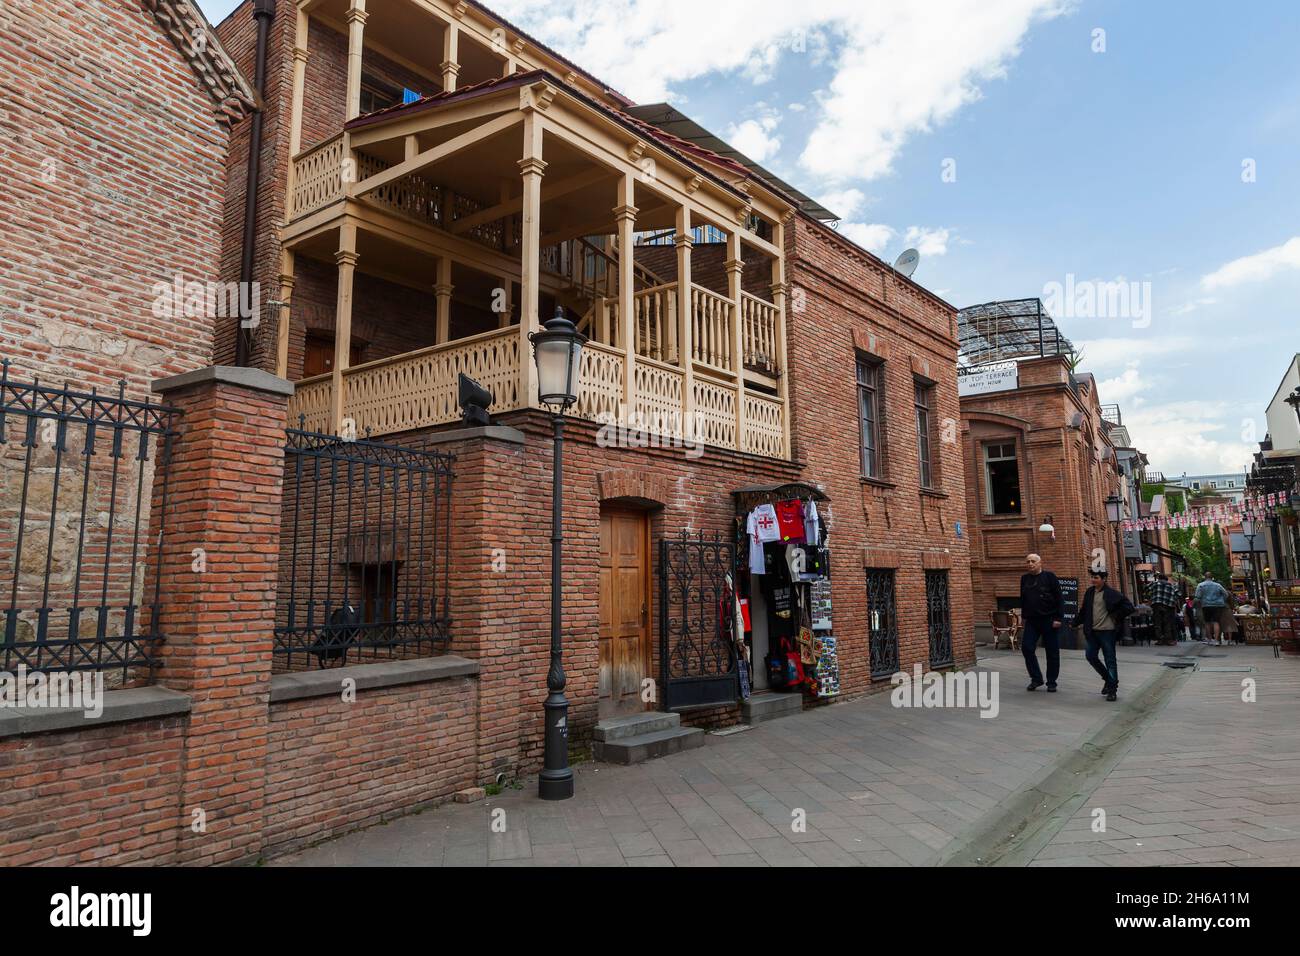 Tbilisi, Georgia - April 28, 2019: Old Tbilisi street view with traditional wooden balconies, ordinary people walk the street Stock Photo